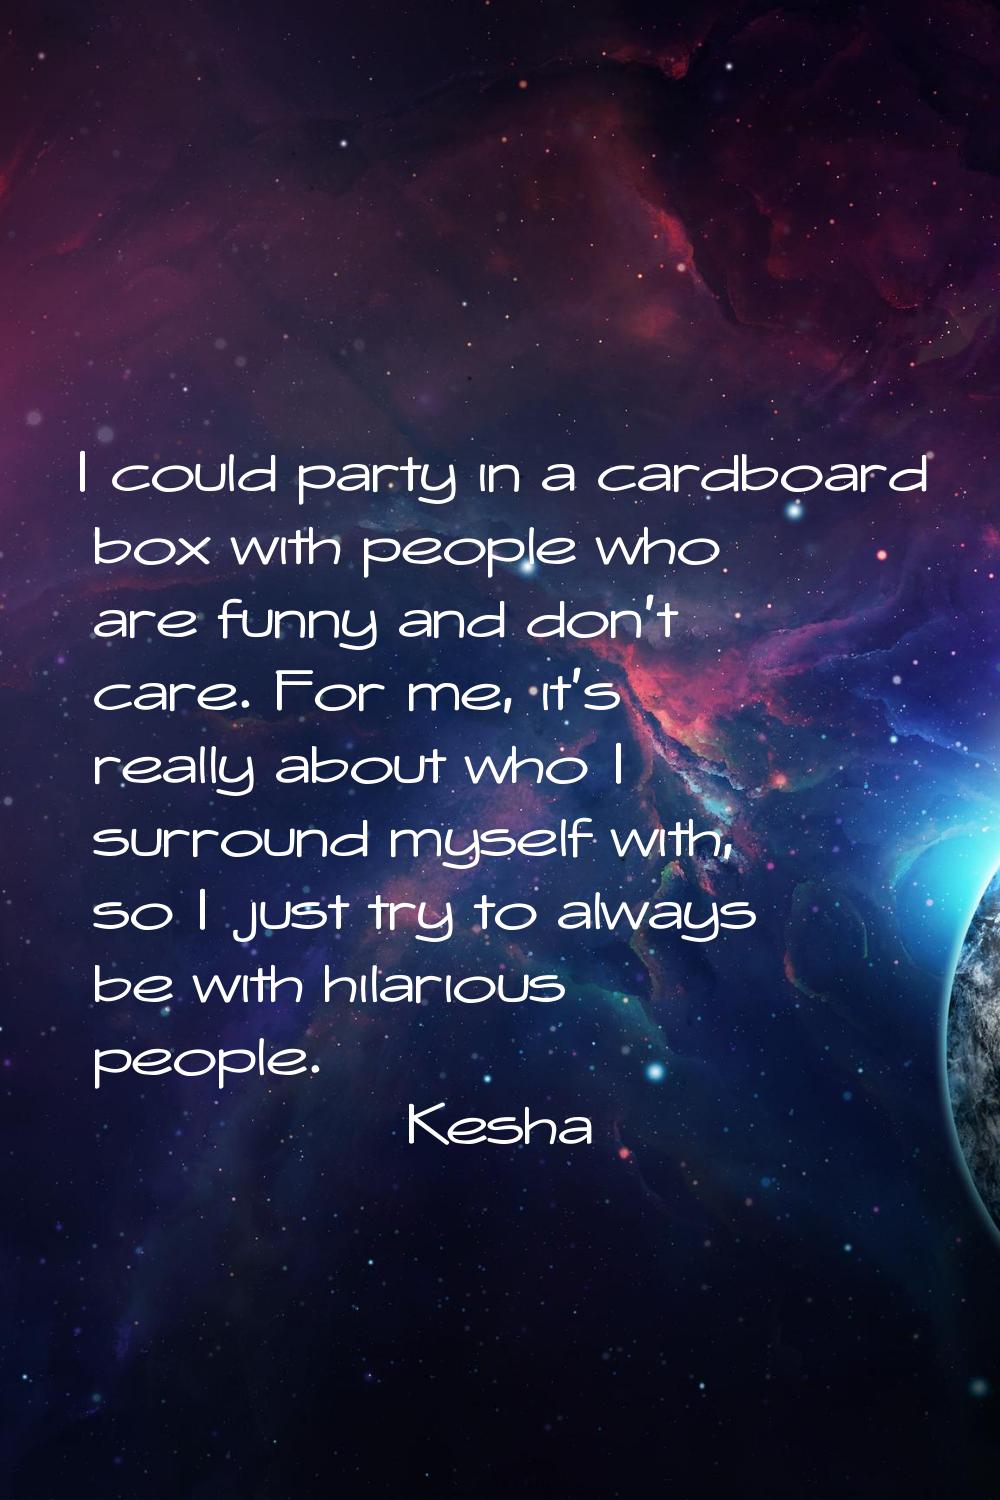 I could party in a cardboard box with people who are funny and don't care. For me, it's really abou